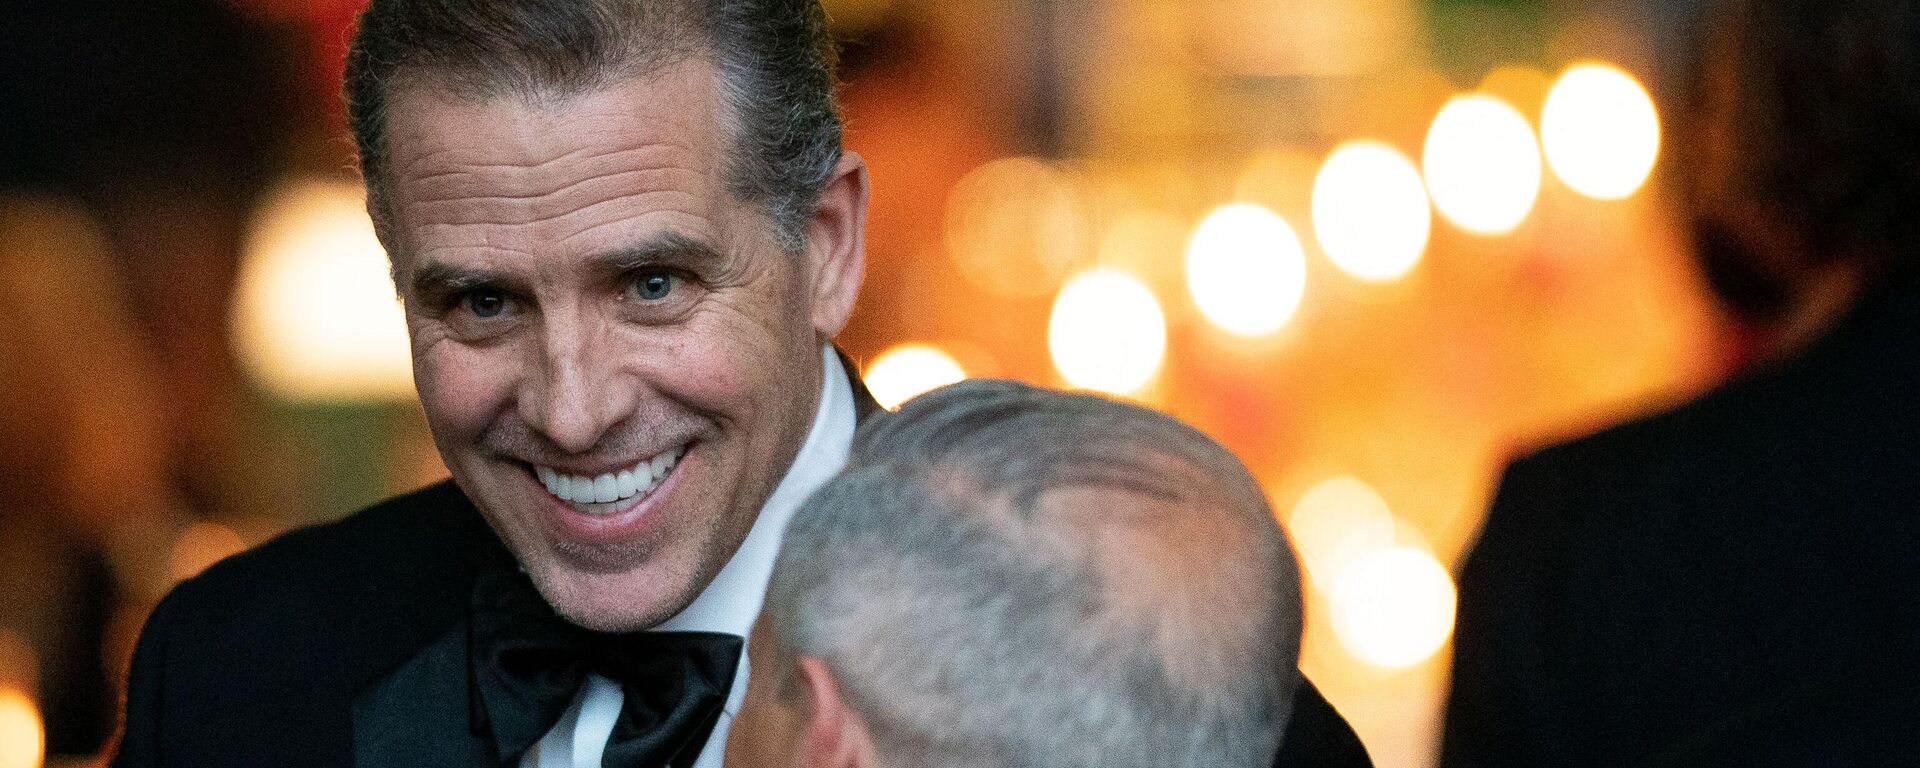 Hunter Biden arrives for a toast during an official State Dinner in honor of India's Prime Minister Narendra Modi, at the White House in Washington, DC, on June 22, 2023. - Sputnik Africa, 1920, 08.12.2023